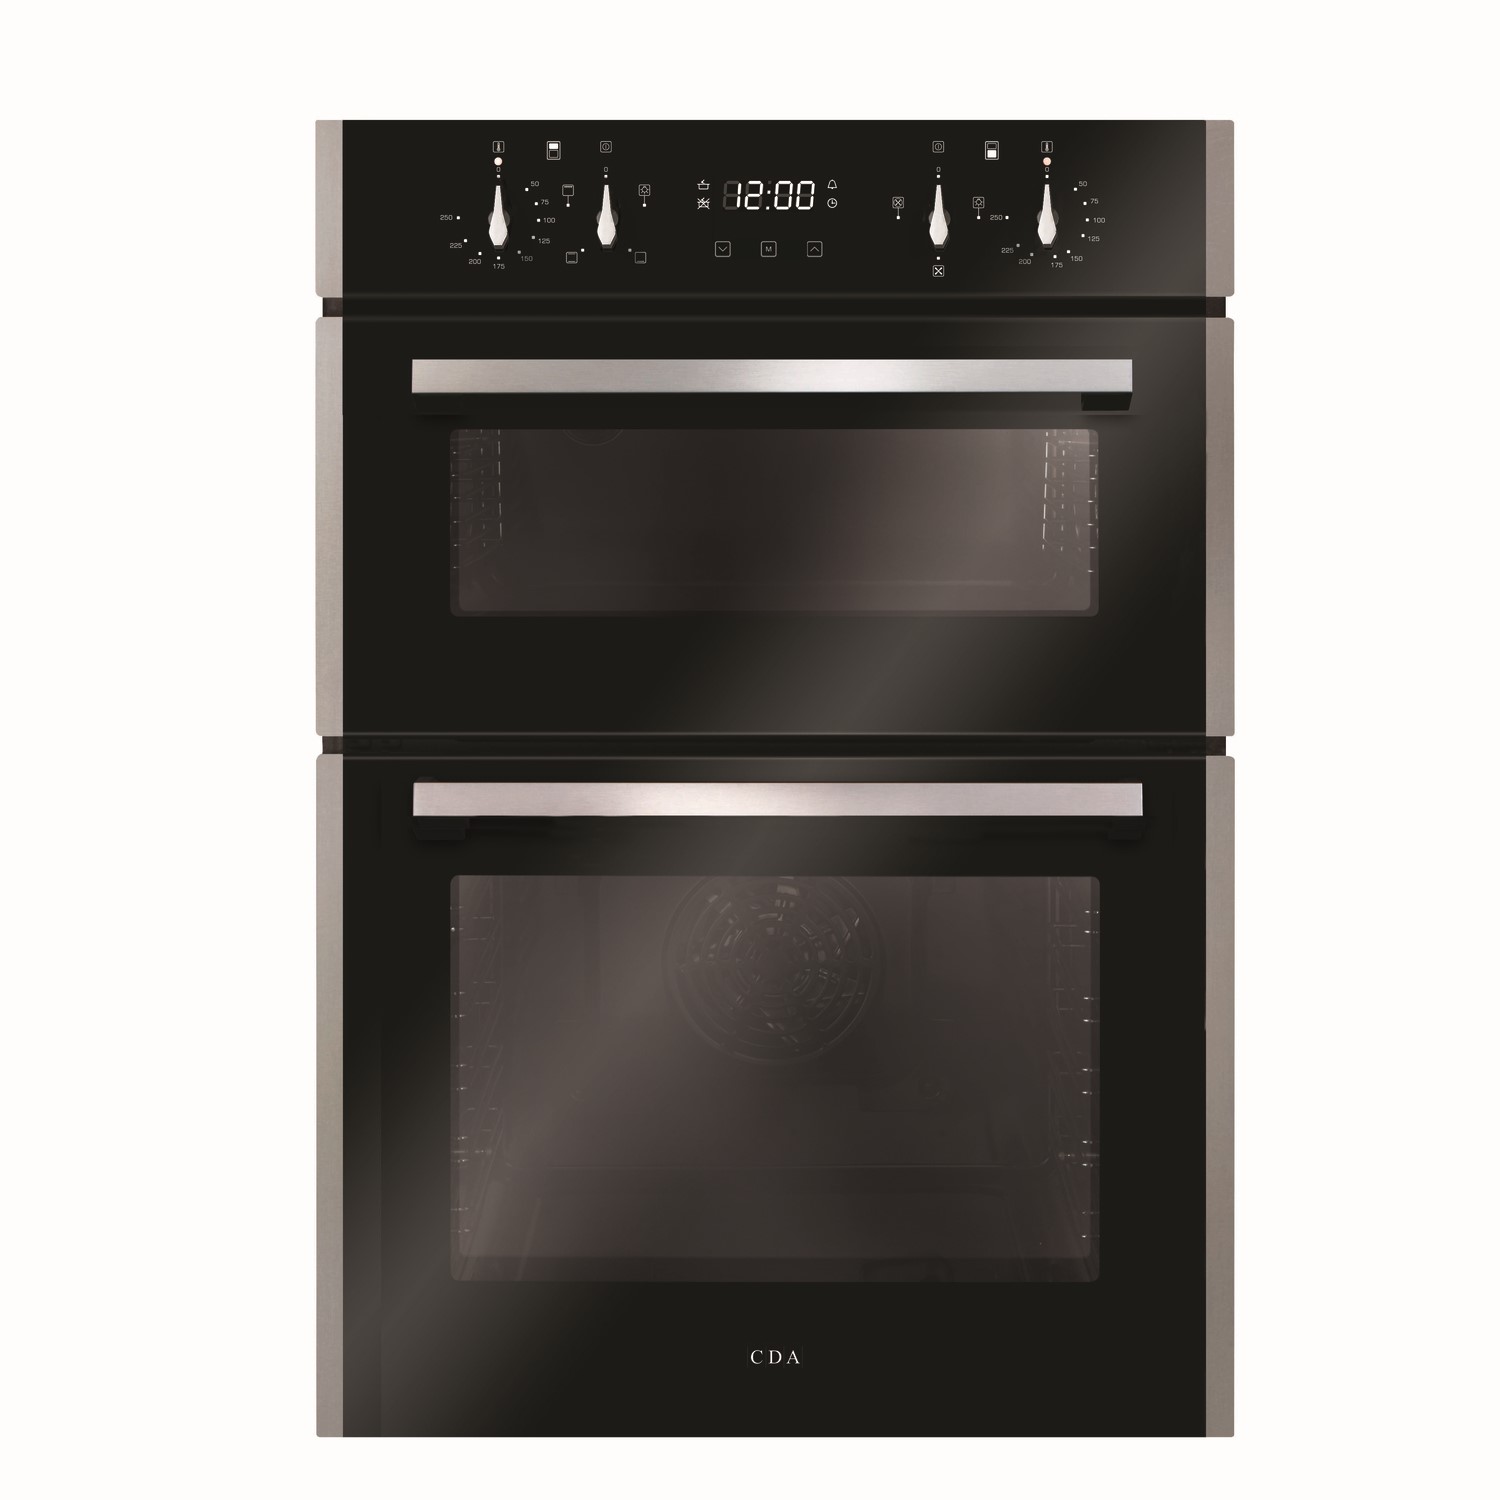 Refurbished CDA DC941SS 60cm Double Built In Electric Oven Stainless Steel